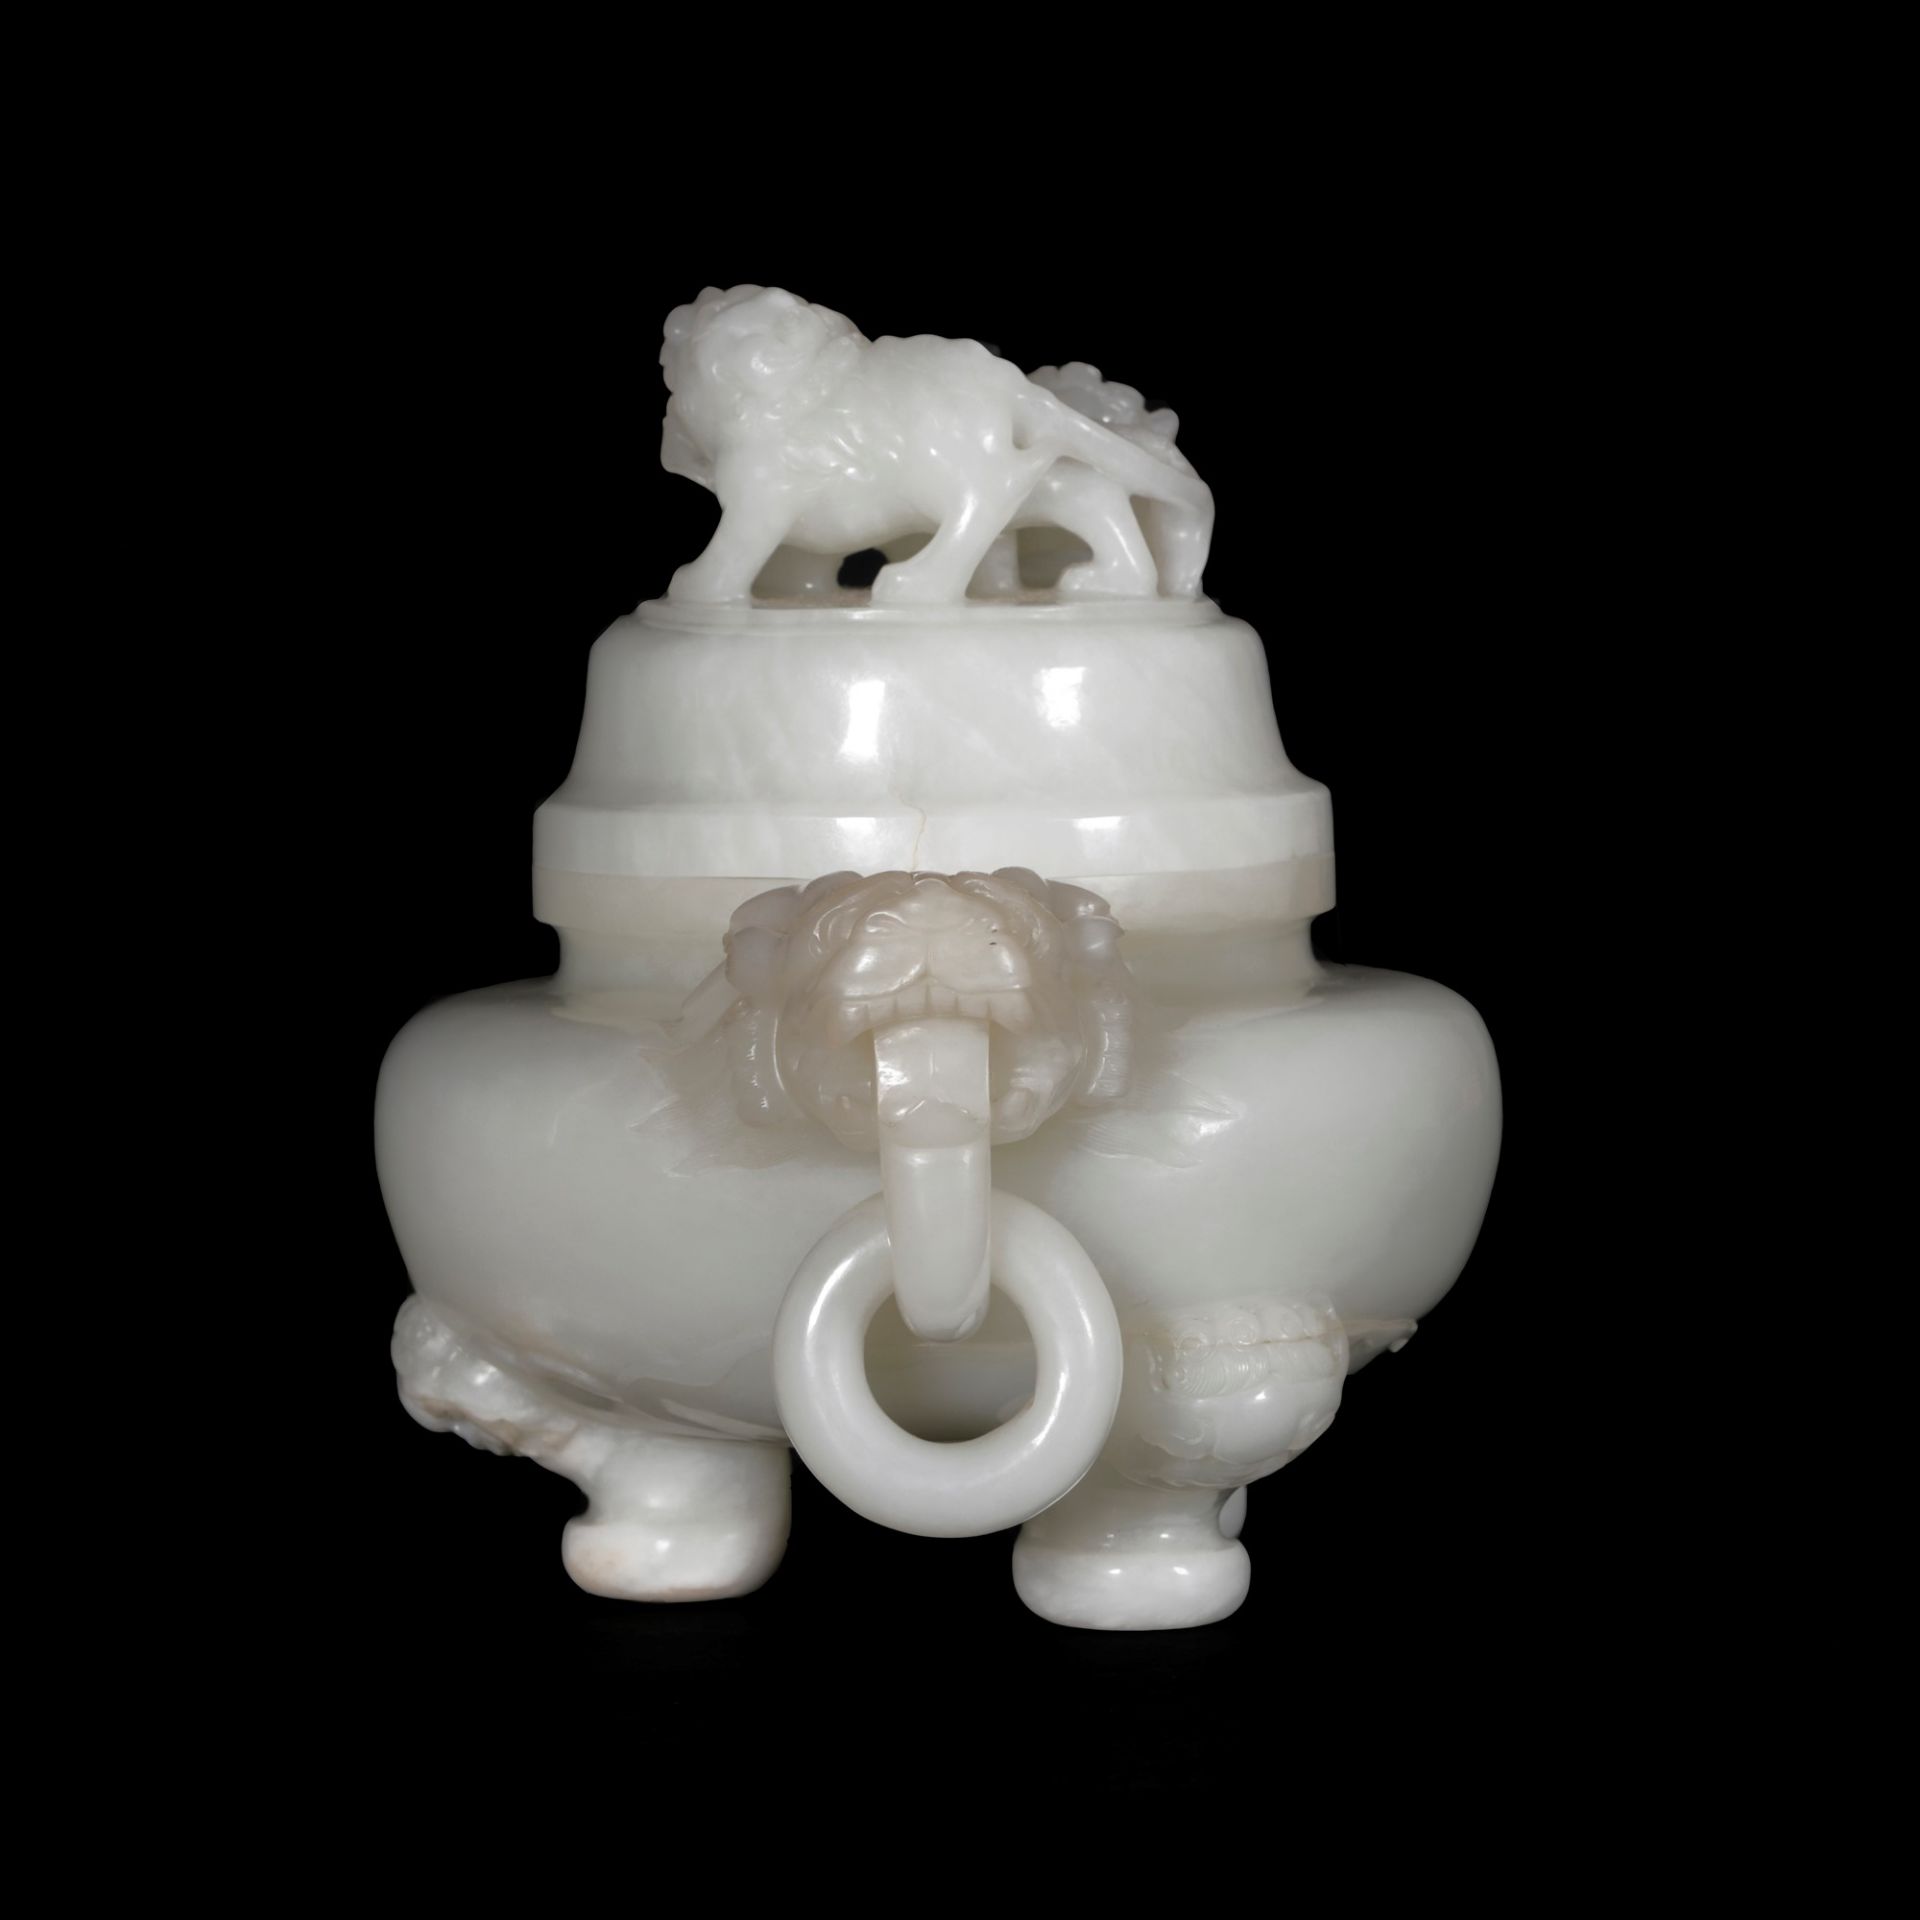 A FINE WHITE TRIP POD CENSER AND COVER, China, Qing dynasty, 19th century - Image 4 of 10